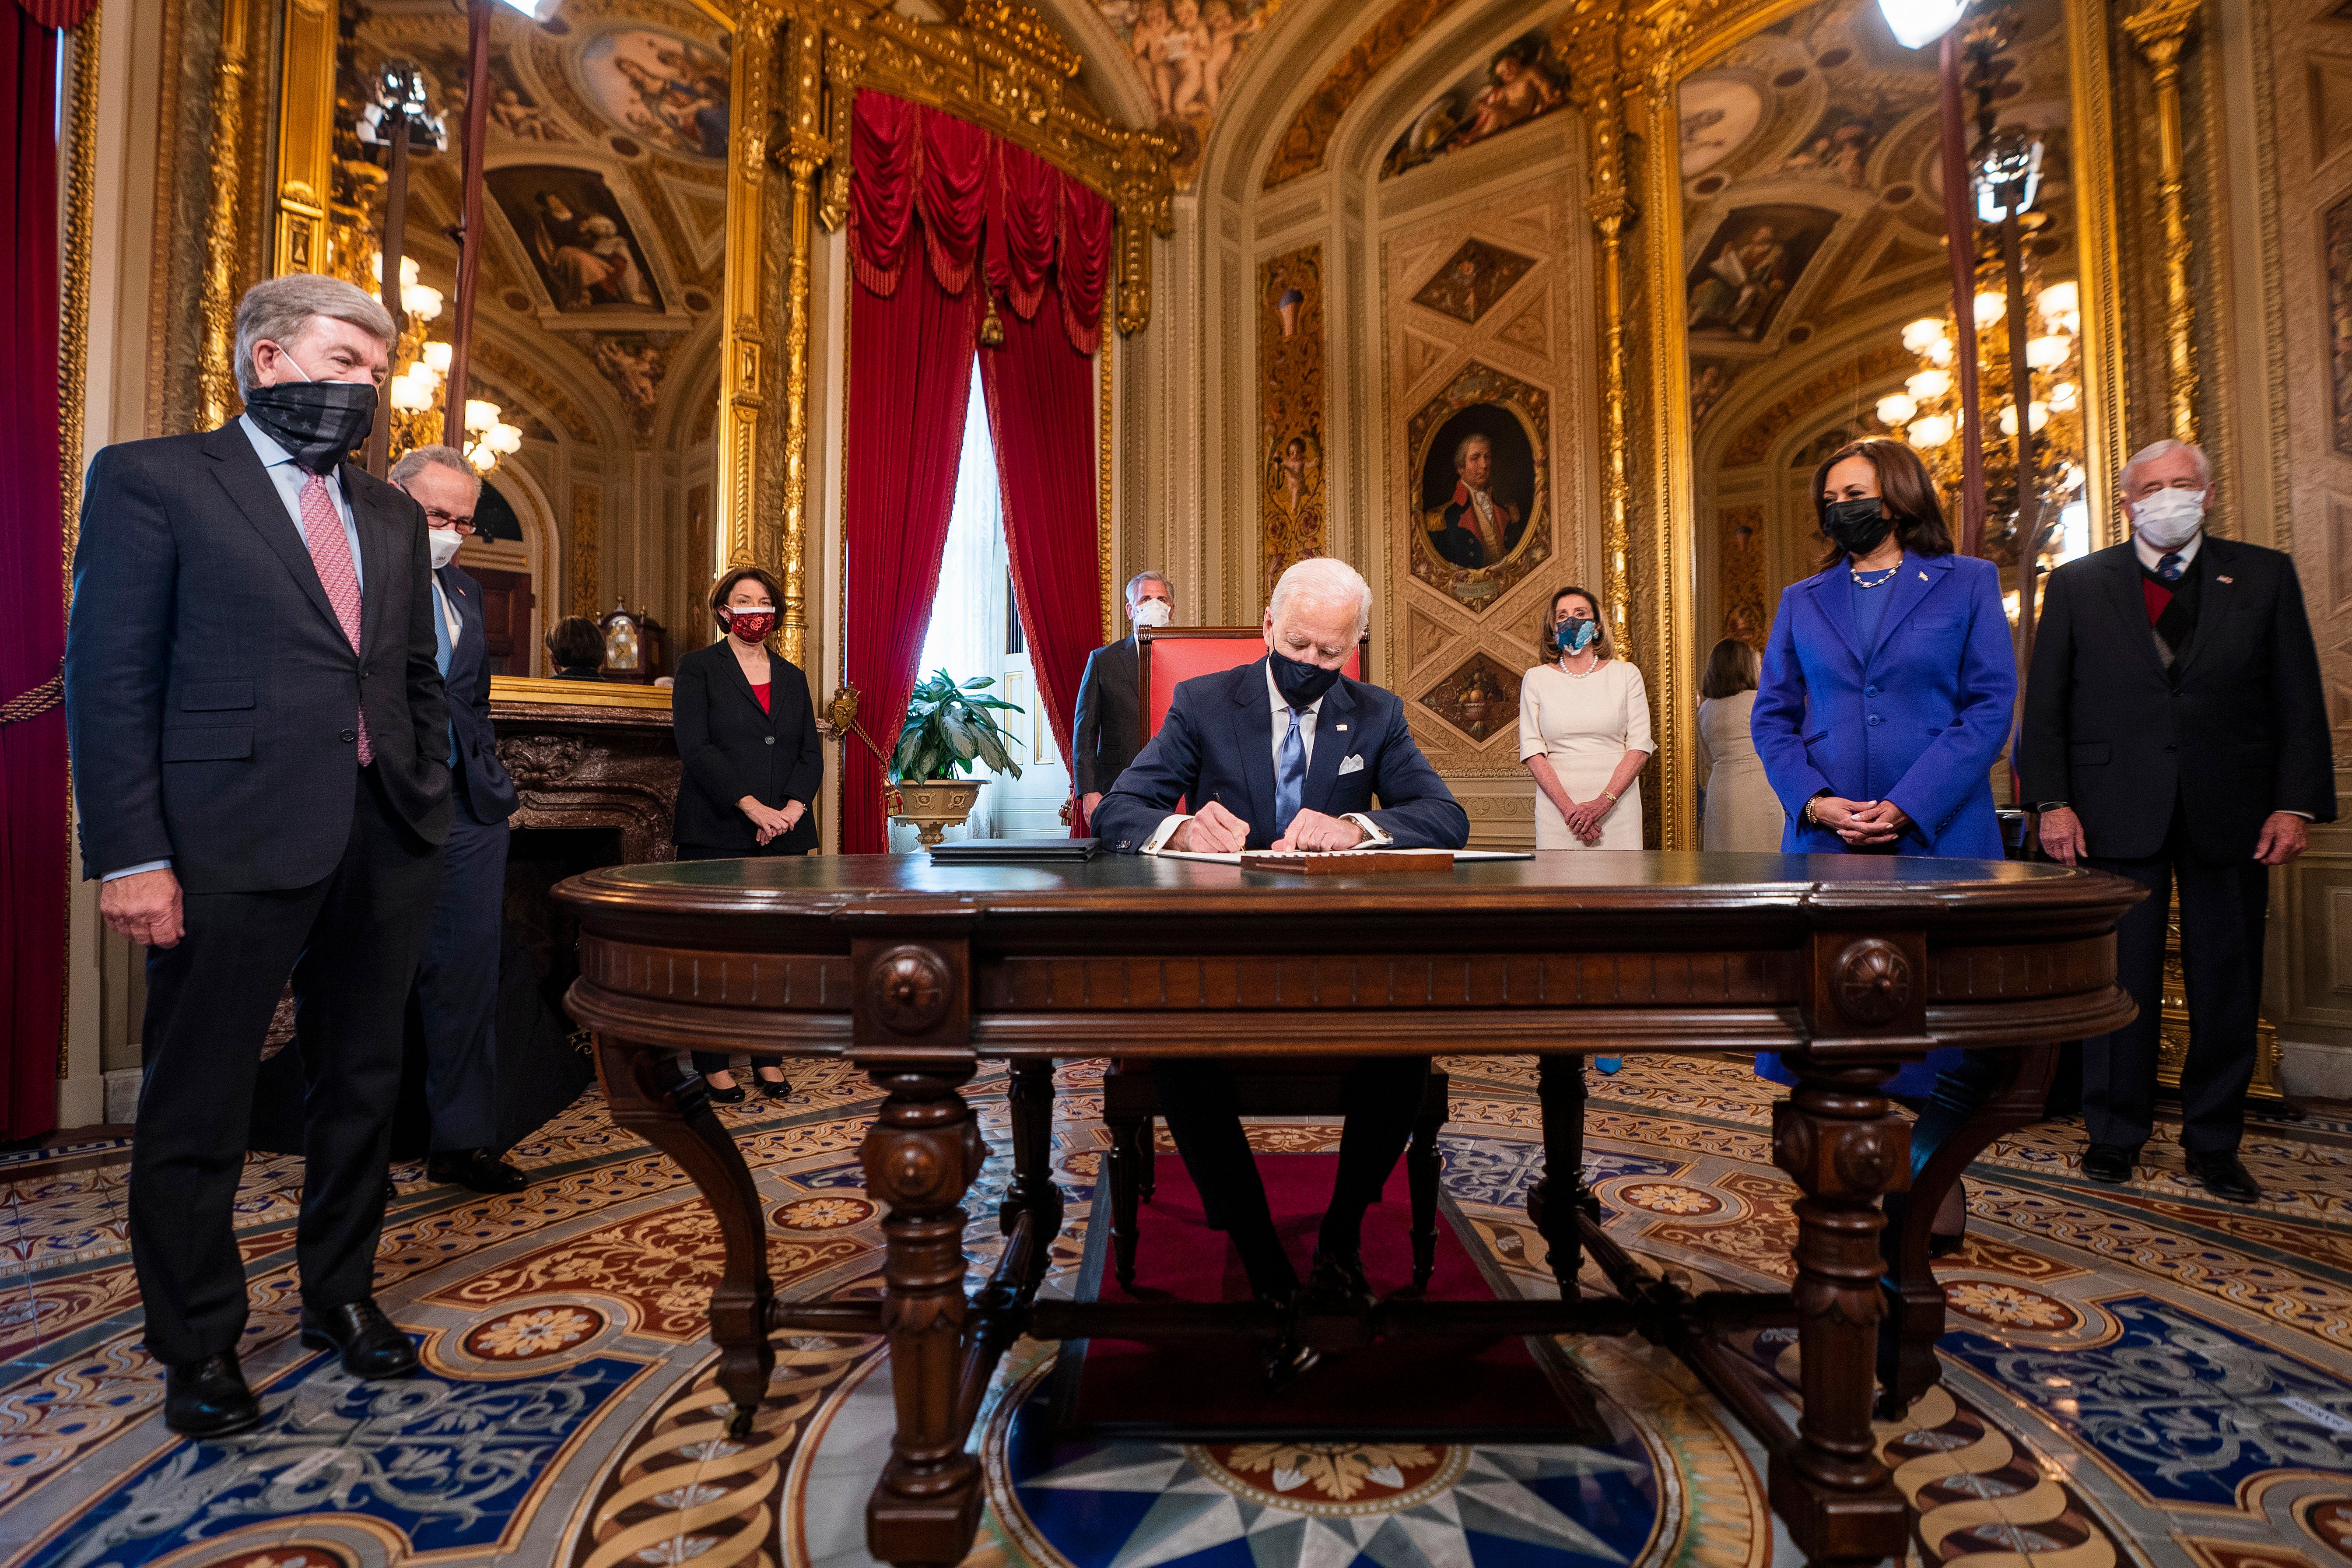 Joe Biden signs three documents including an inauguration declaration, cabinet nominations, and sub-cabinet nominations in the President’s Room at the Capitol&nbsp;